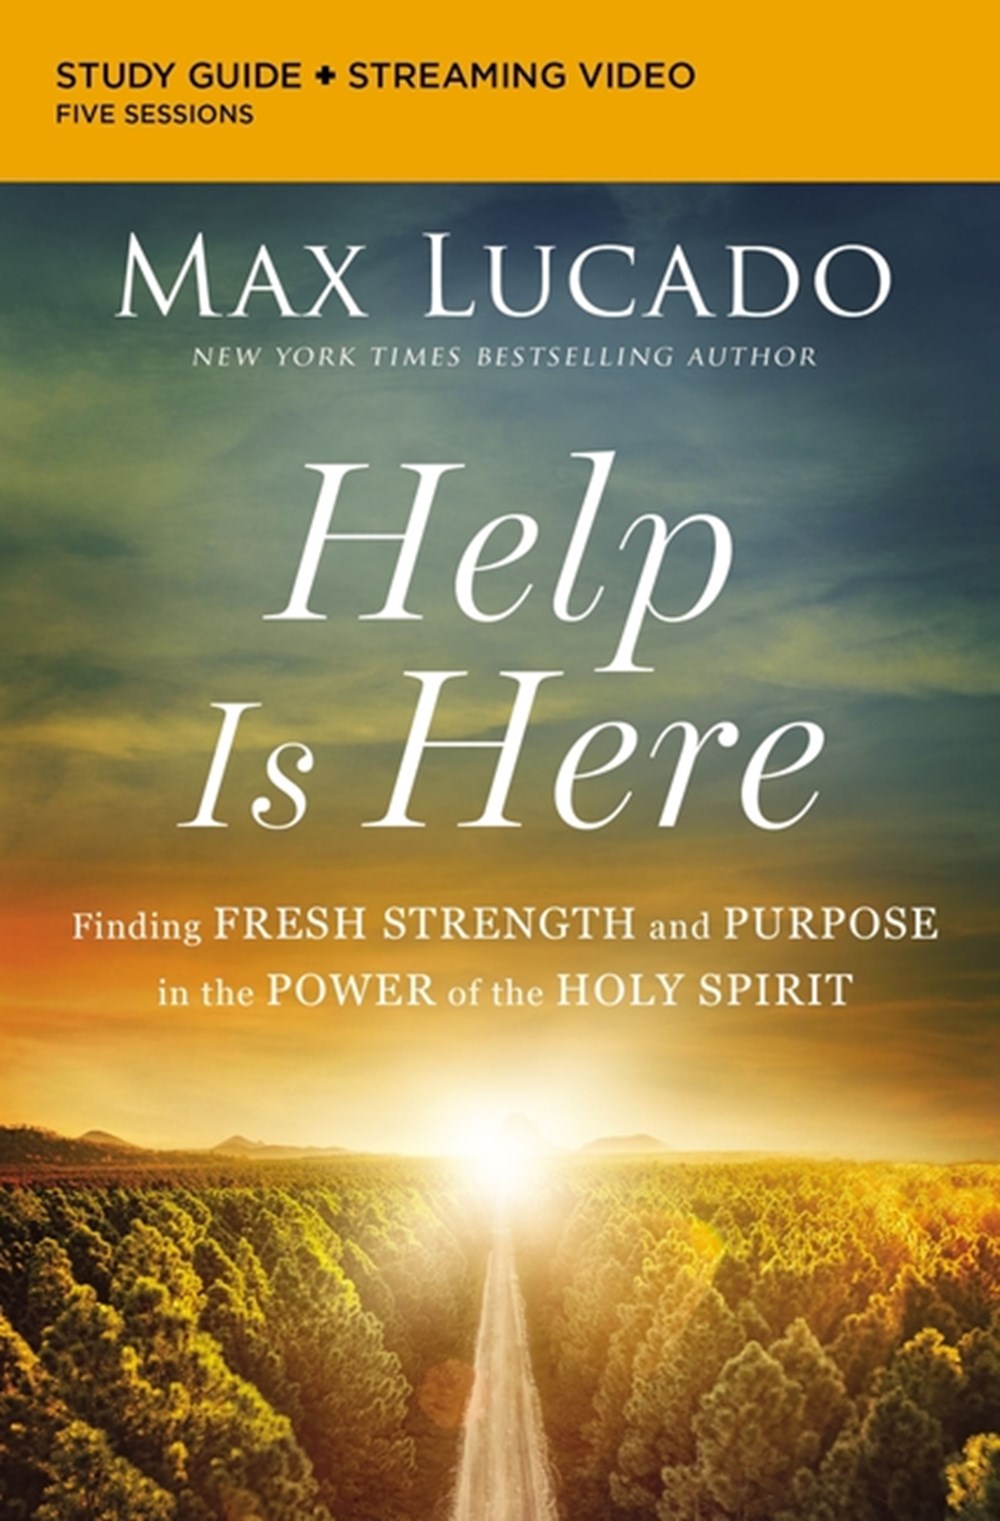 Help Is Here Bible Study Guide Plus Streaming Video: Finding Fresh Strength and Purpose in the Power